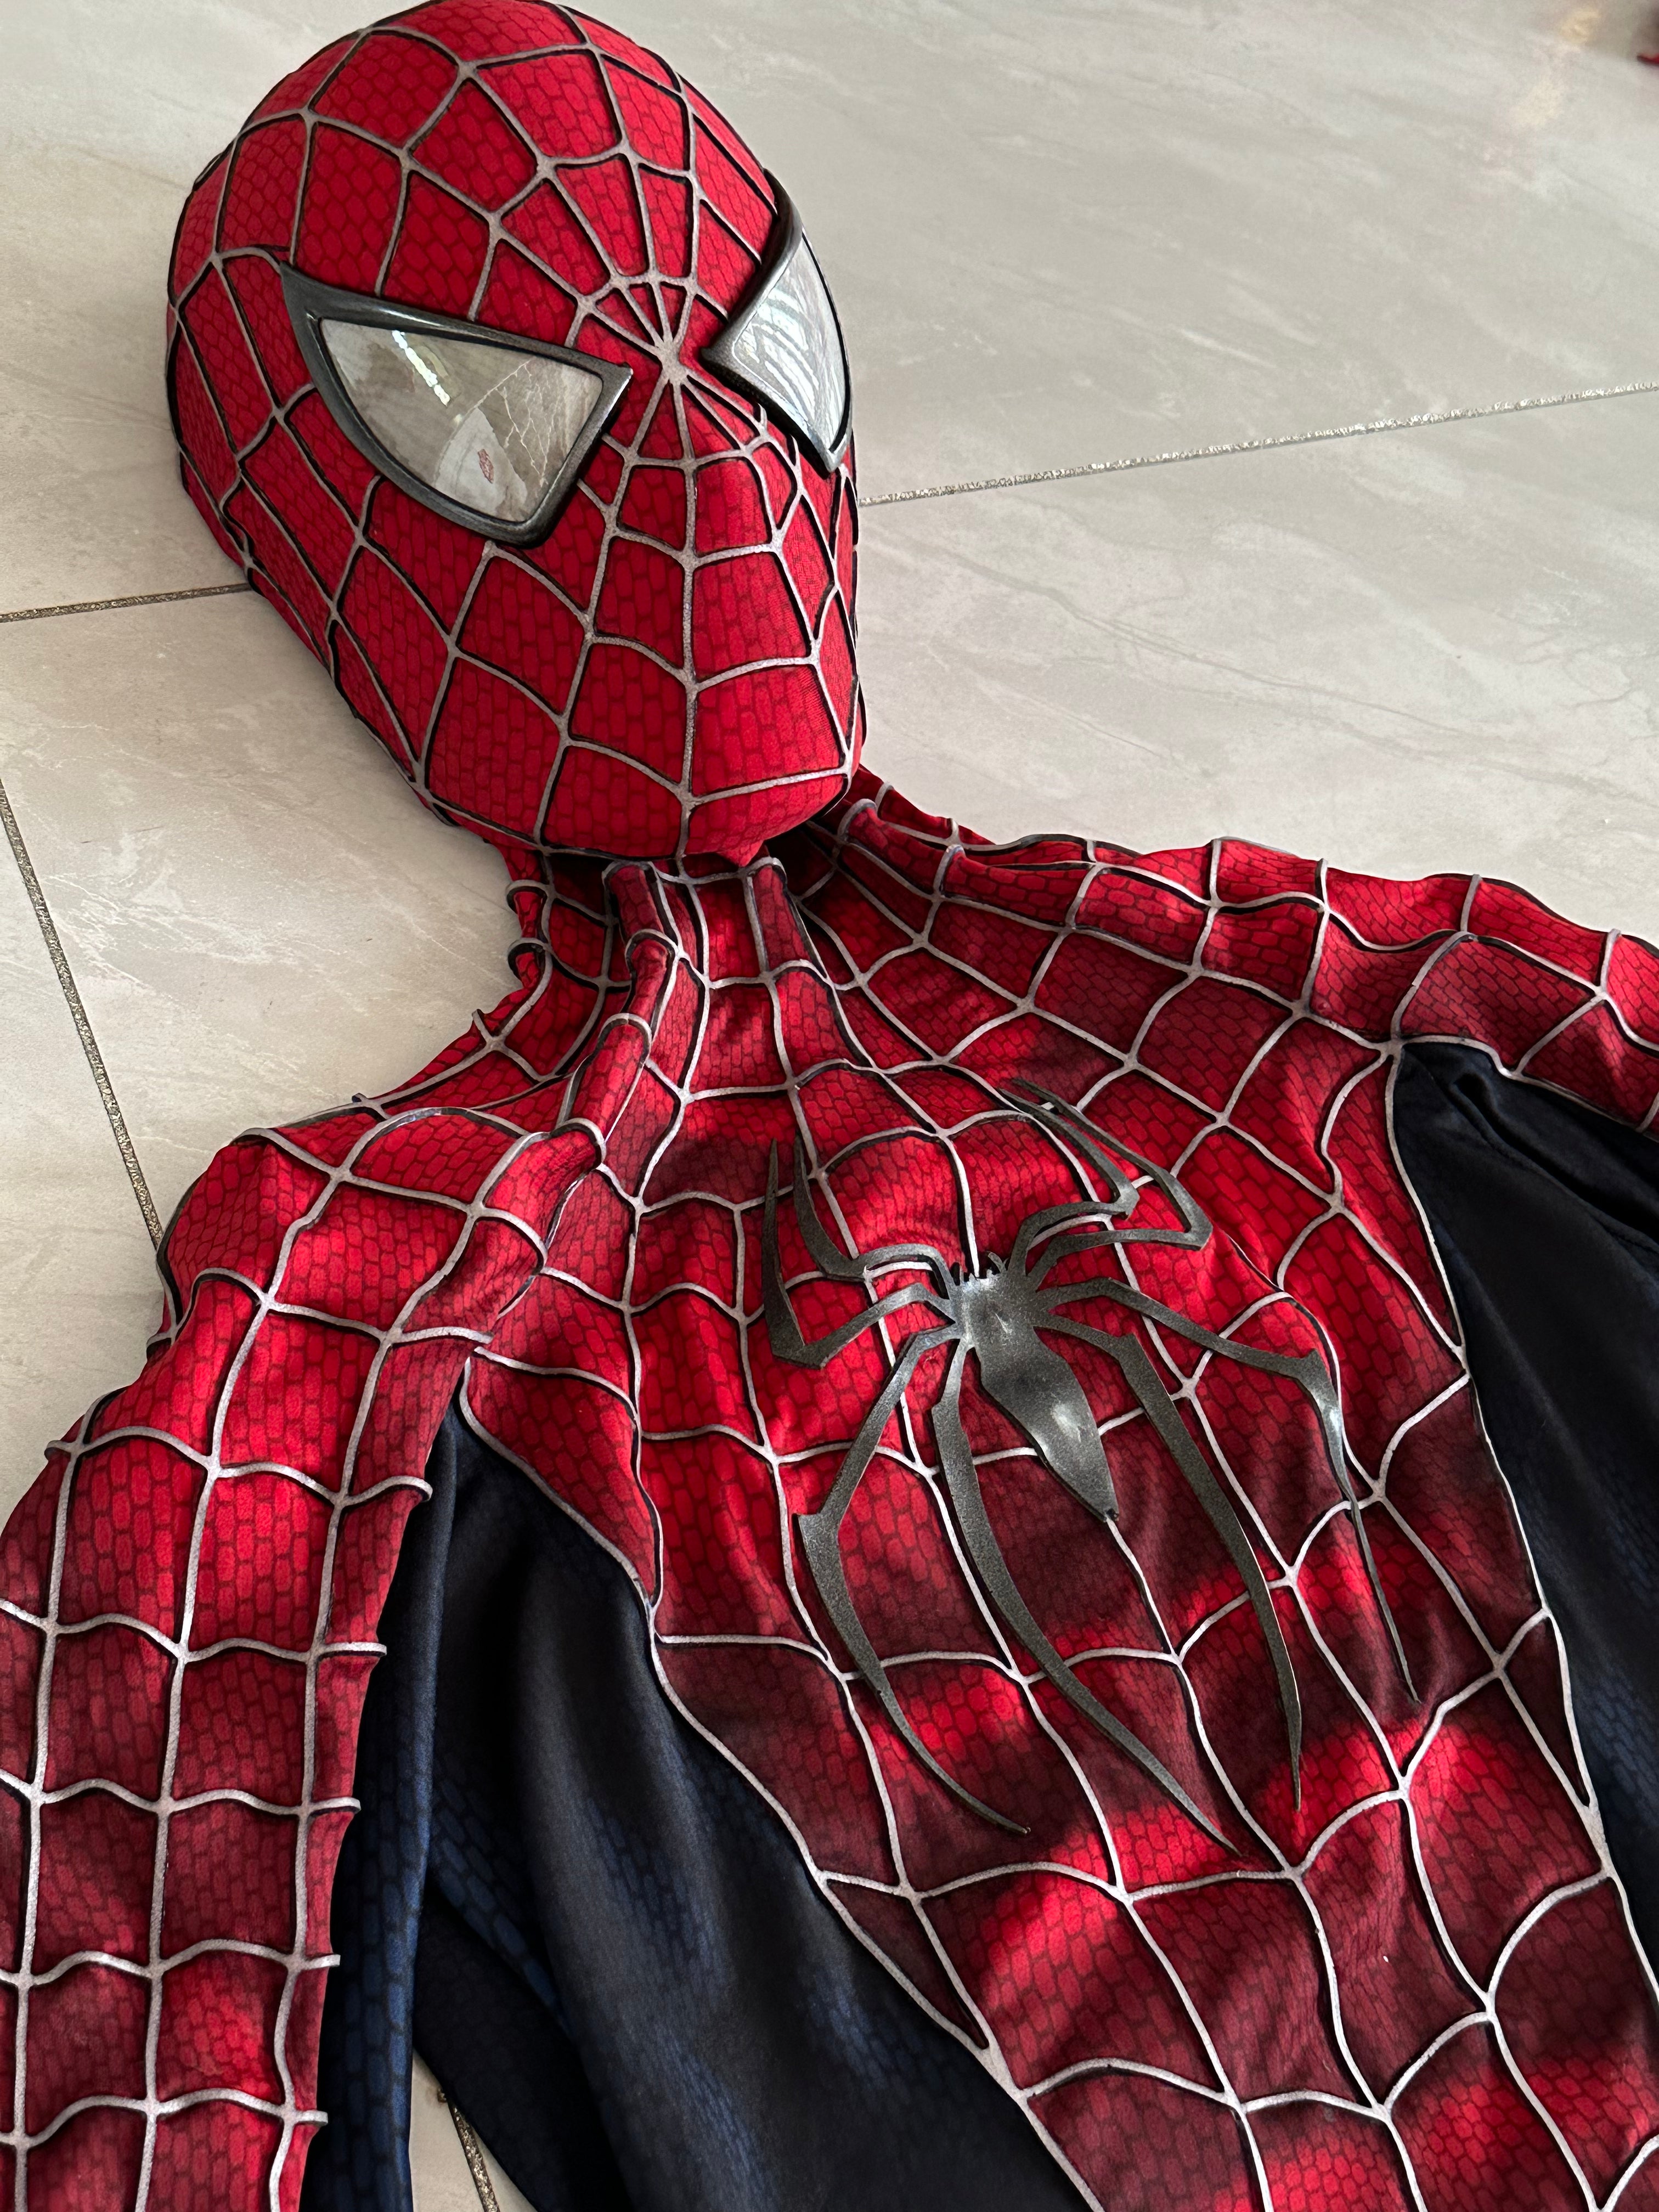 Spidey Suit SAM RAIMI TOBEY version with Face shell & 3D Rubber Web Movie Prop Replica(wearable)